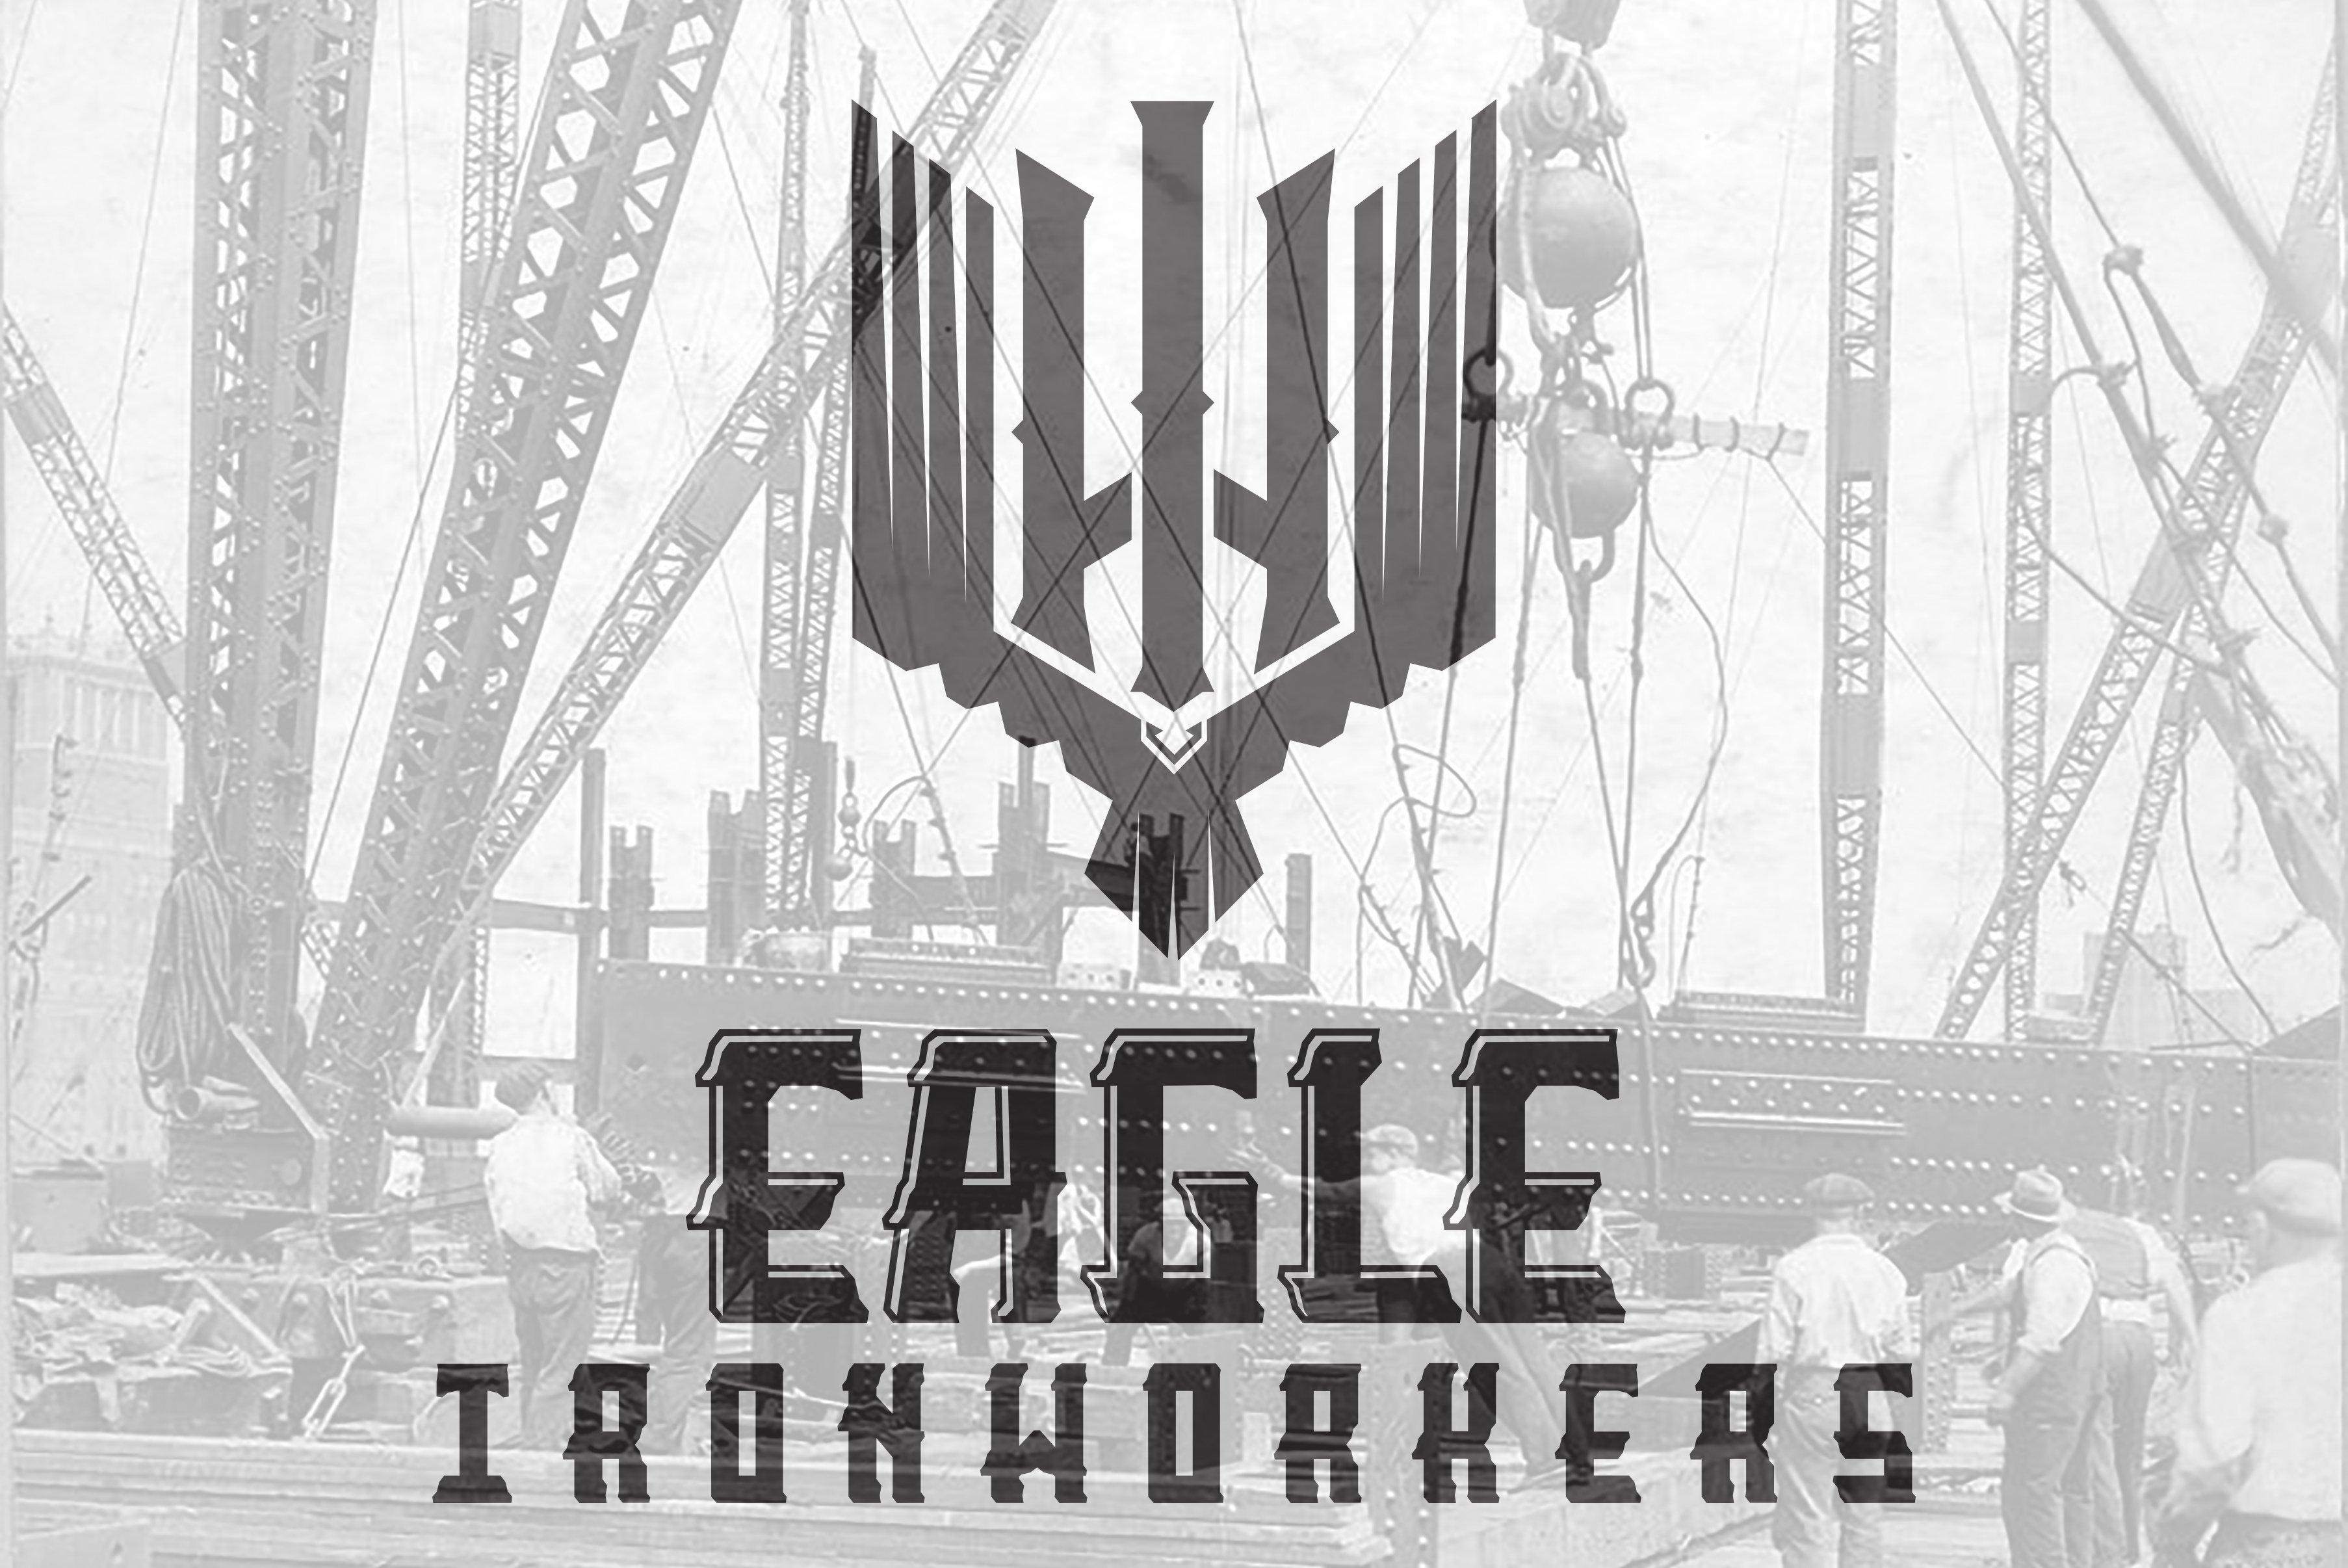 Ironworker Display font preview image.